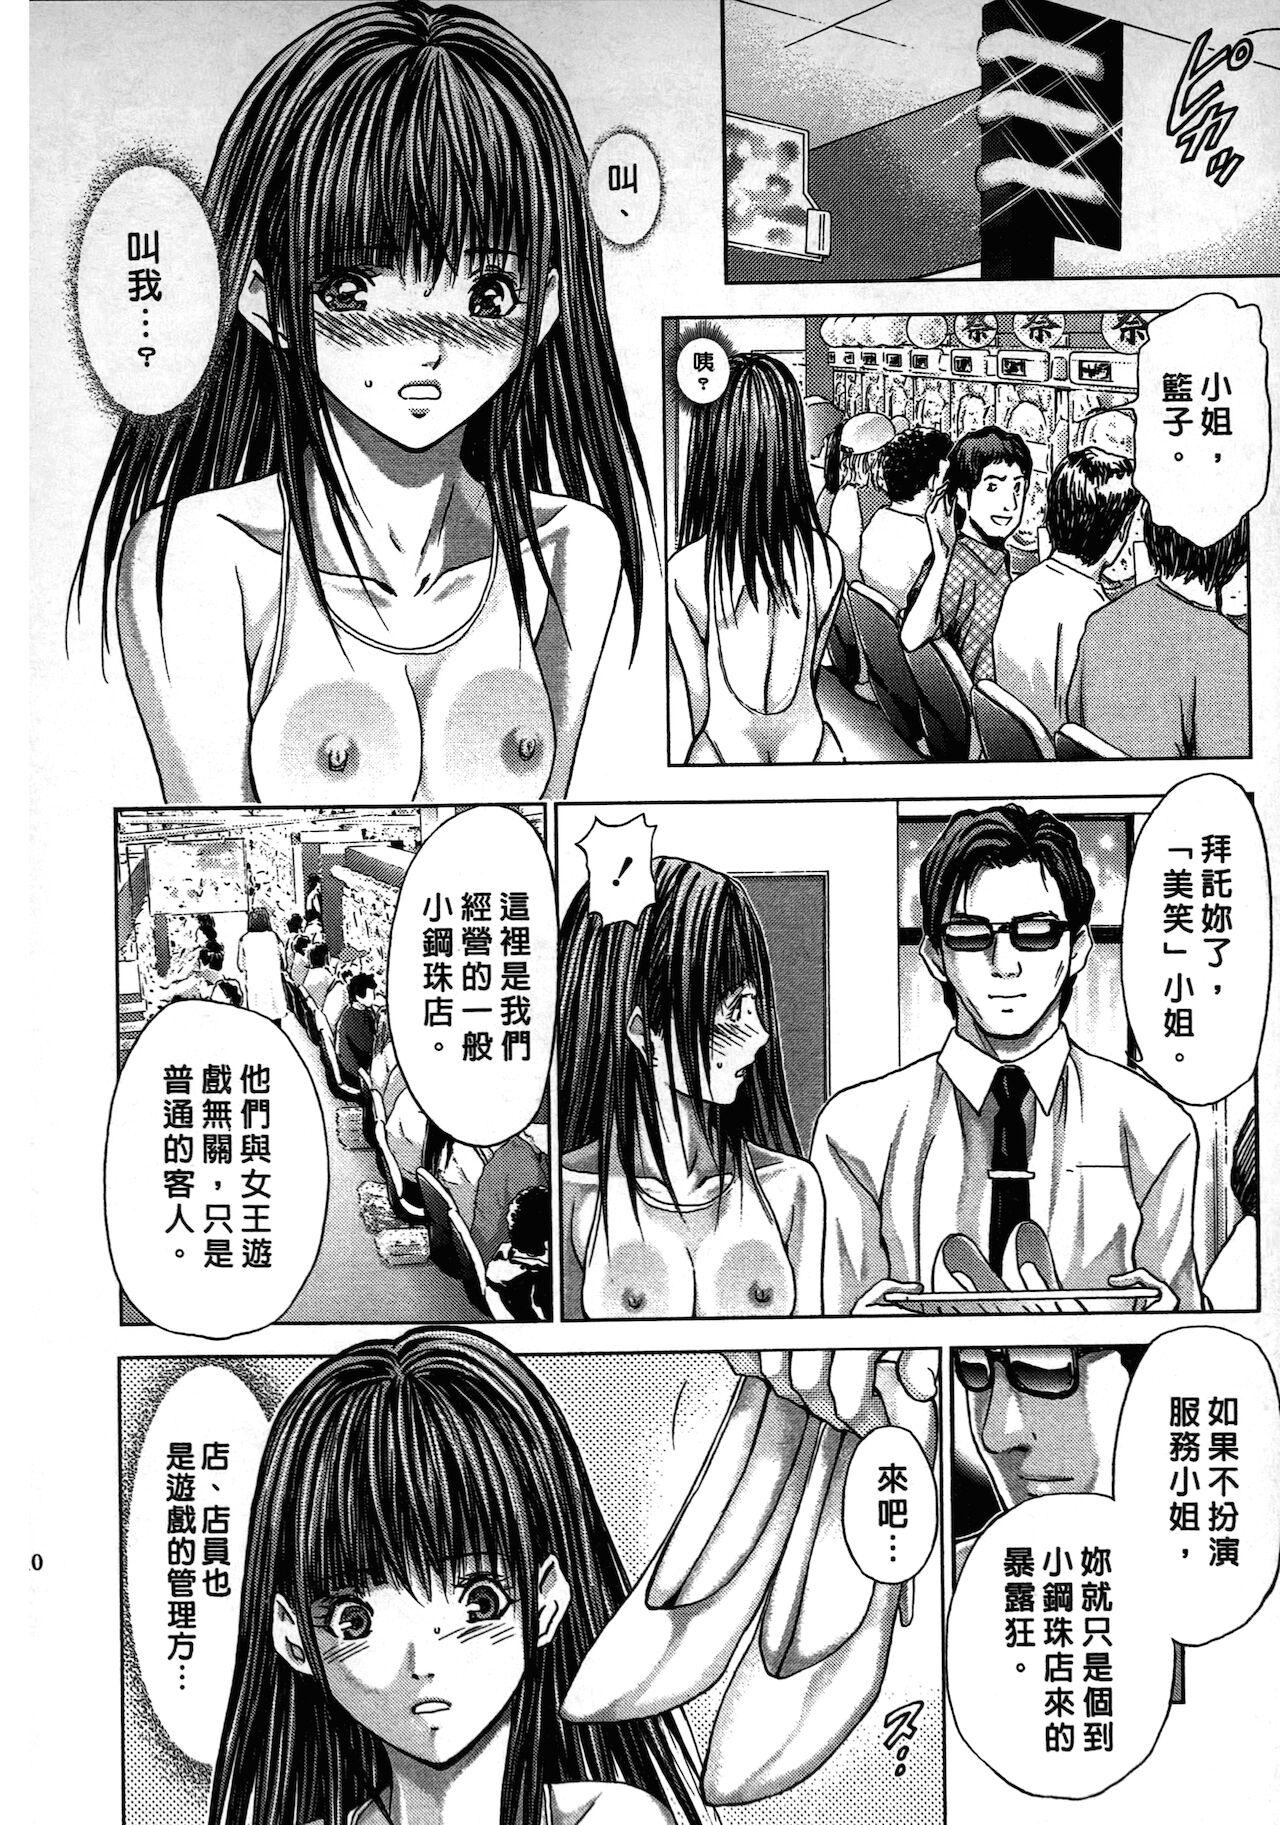 Hot Girl Porn [Adachi Takumi] Queen's Game ~Haitoku no Mysterious Game~ 2 | 女王遊戲 ~背德的詭譎遊戲~ 2 [Chinese] Gay Boysporn - Page 10